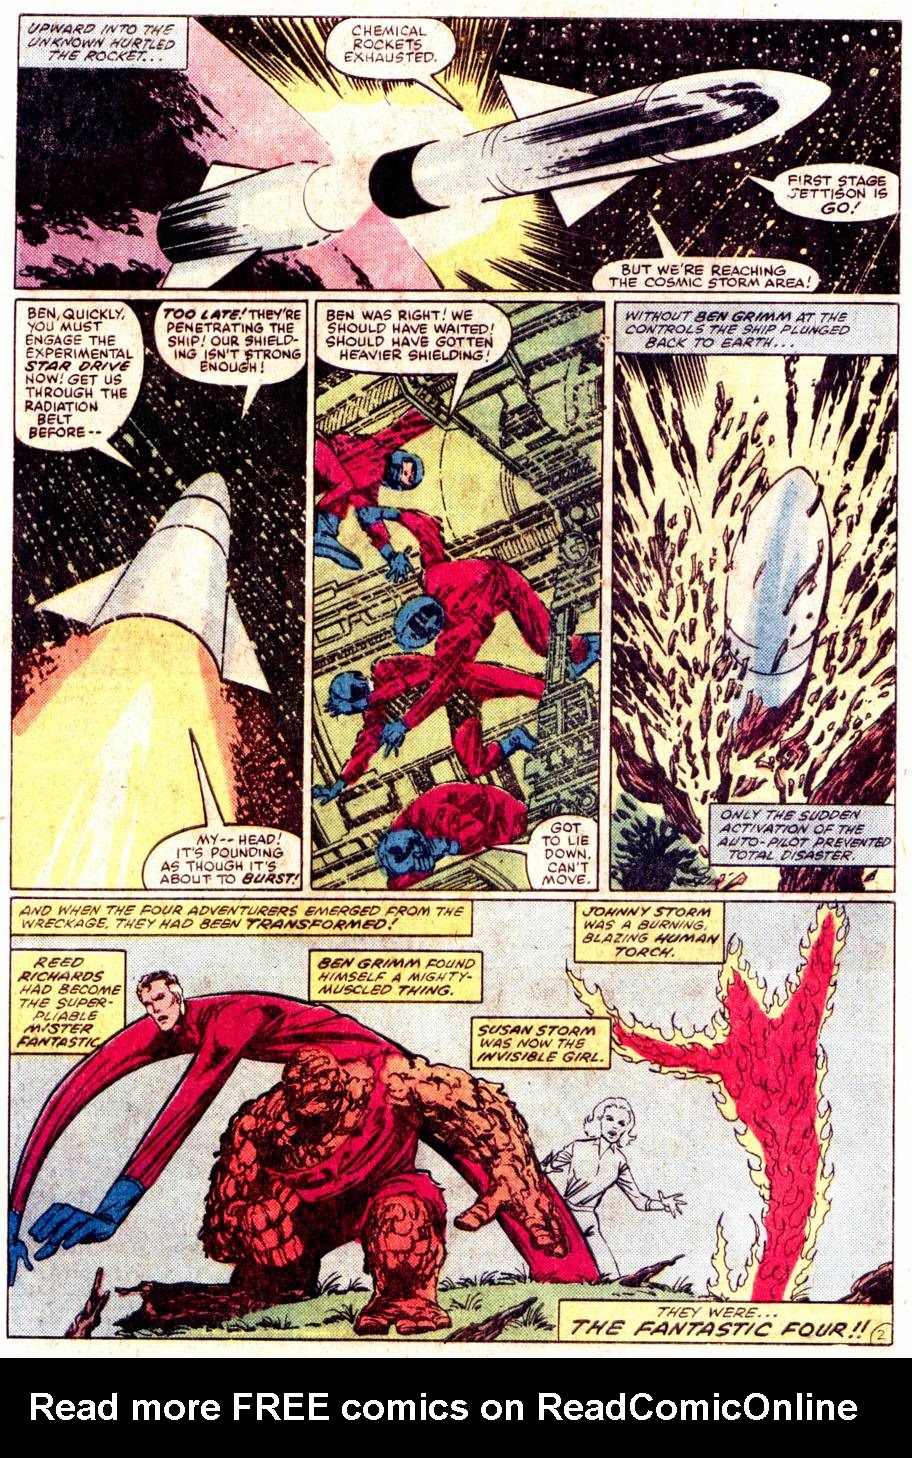 What If? (1977) issue 36 - The Fantastic Four Had Not Gained Their Powers - Page 3